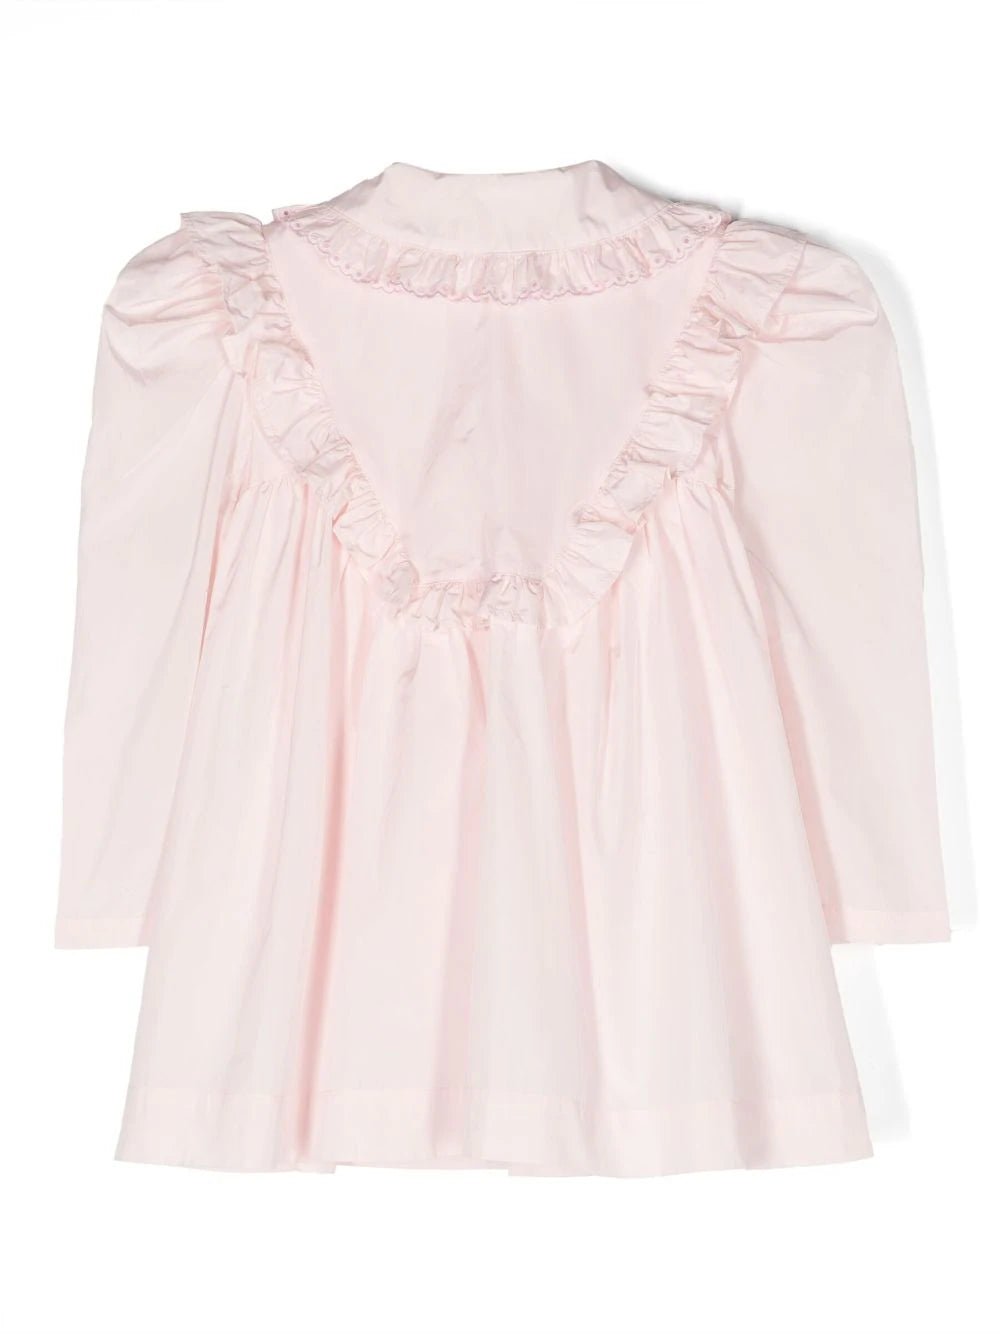 Collared Dress Button With Ruffled Detail - C005 Rose - Posh New York